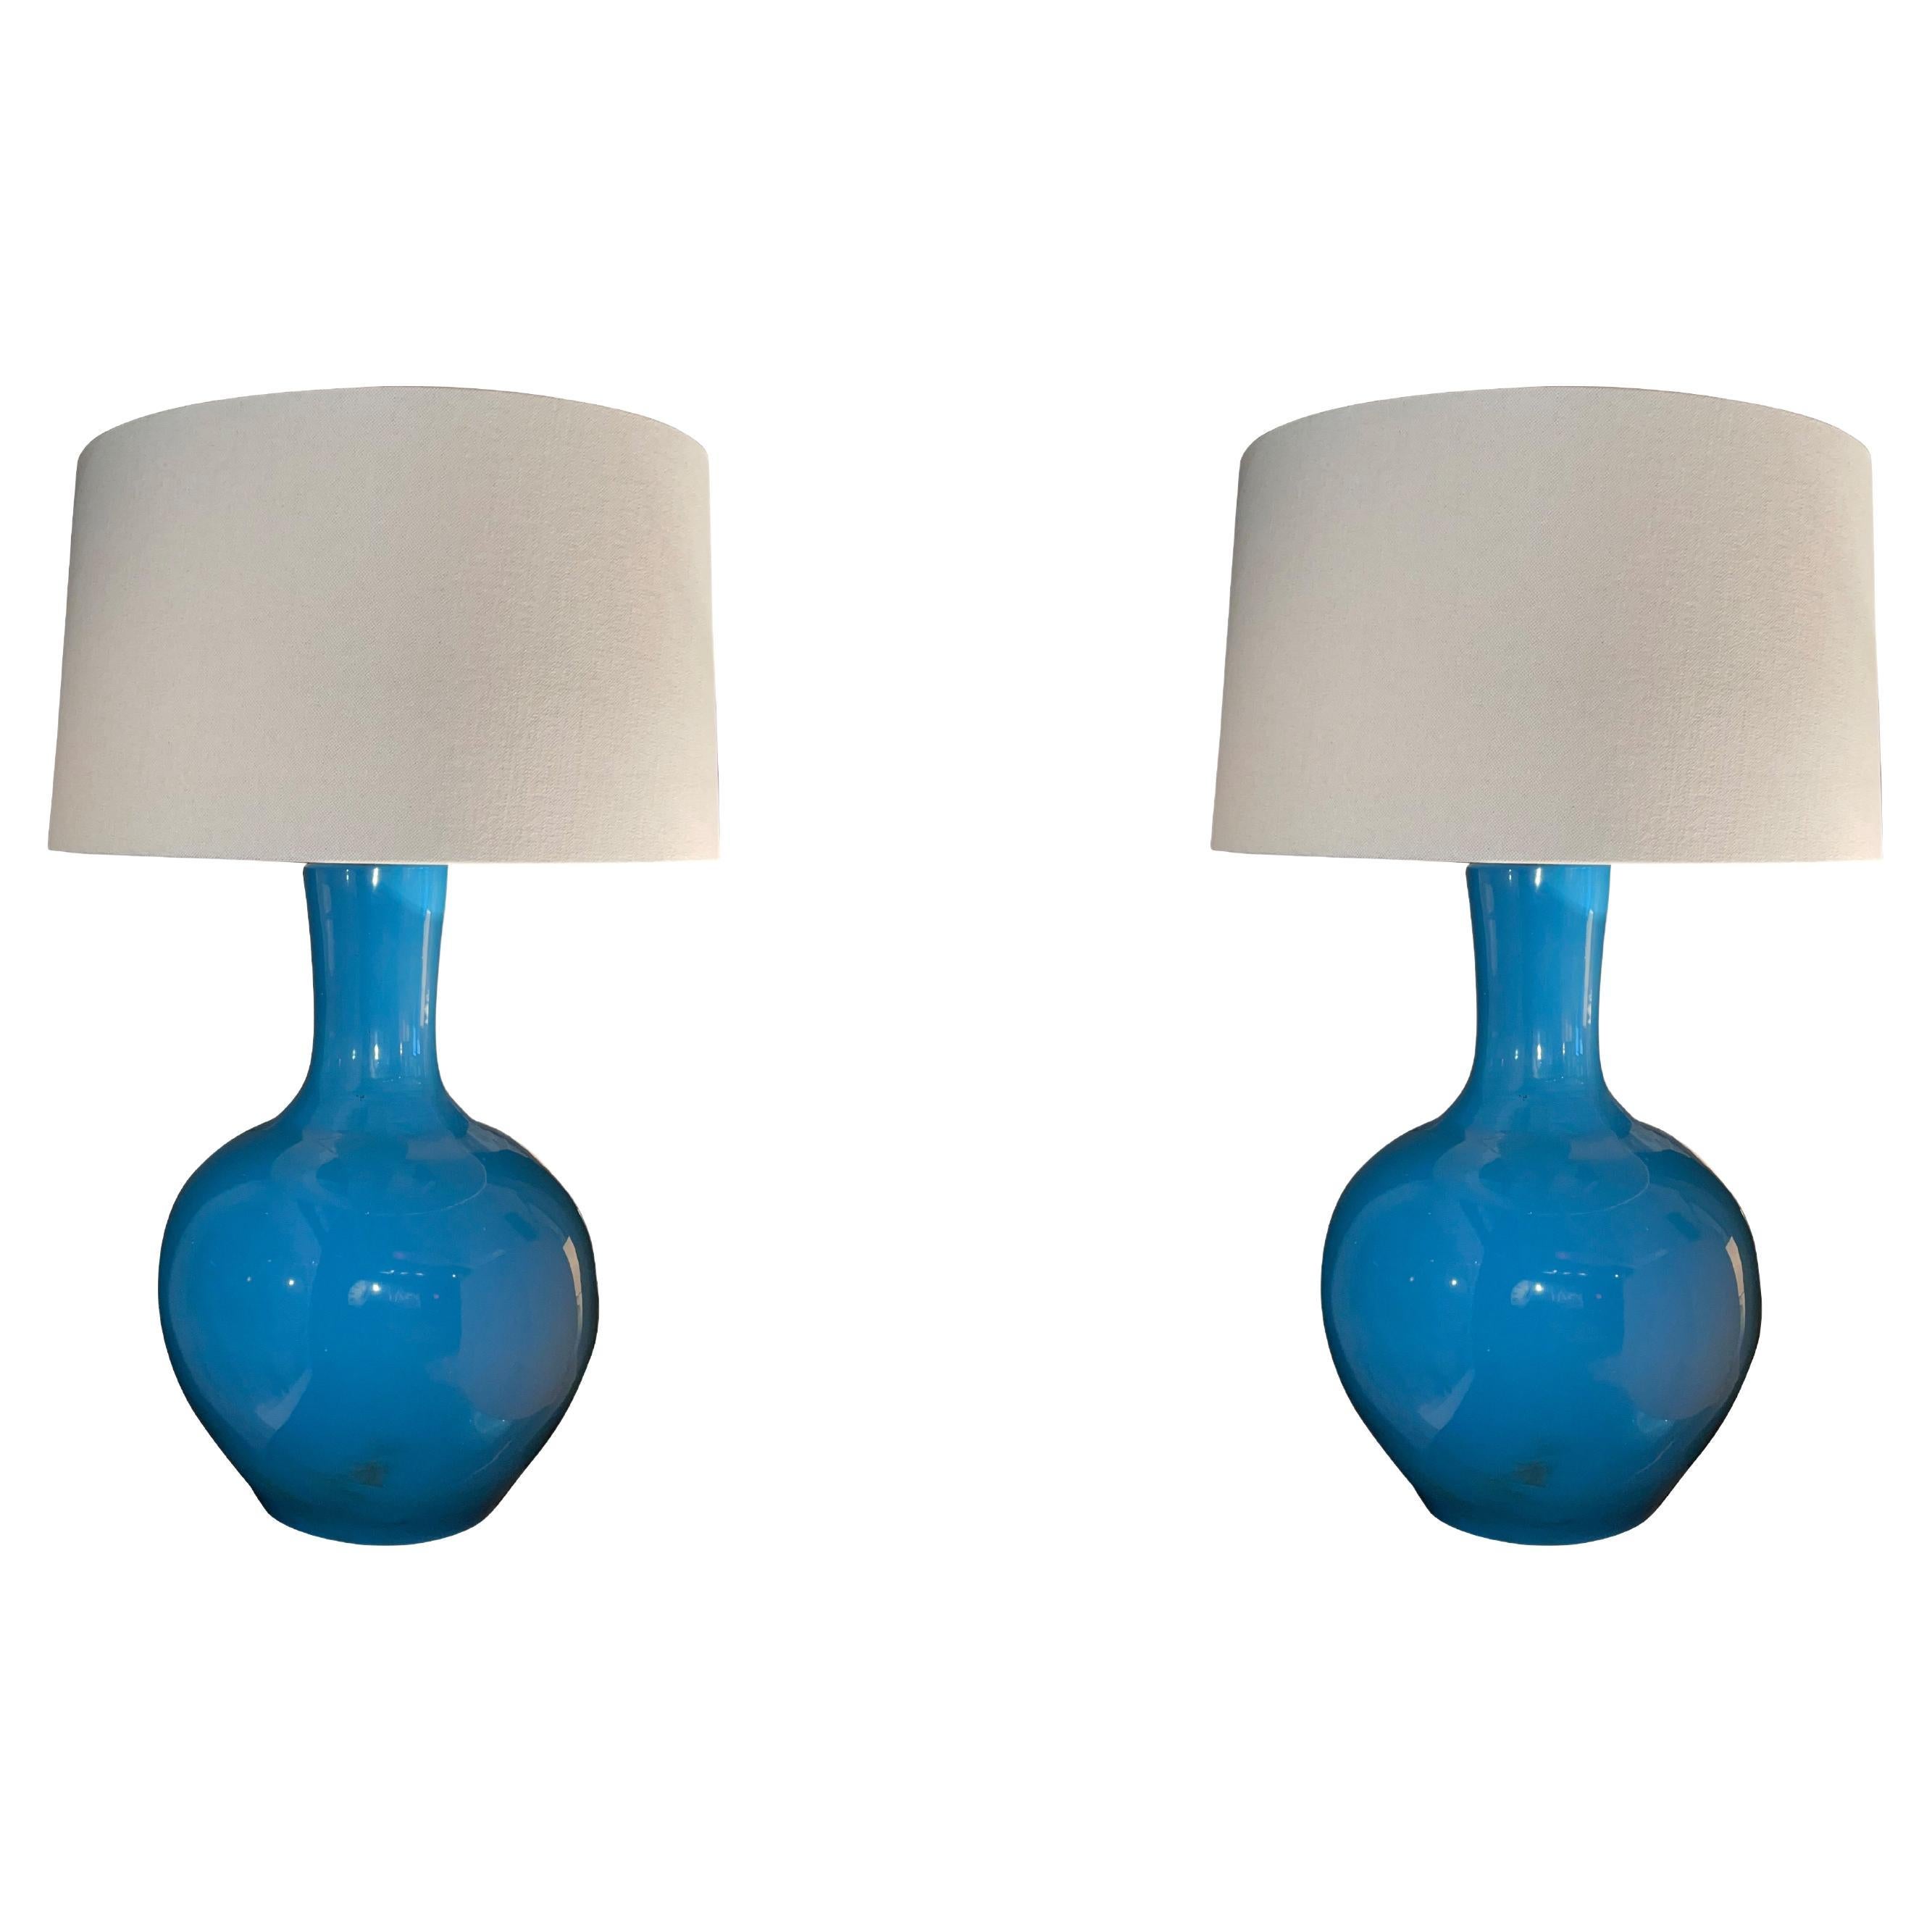 Blue Funnel Neck Ceramic Pair of Lamps, China, Contemporary